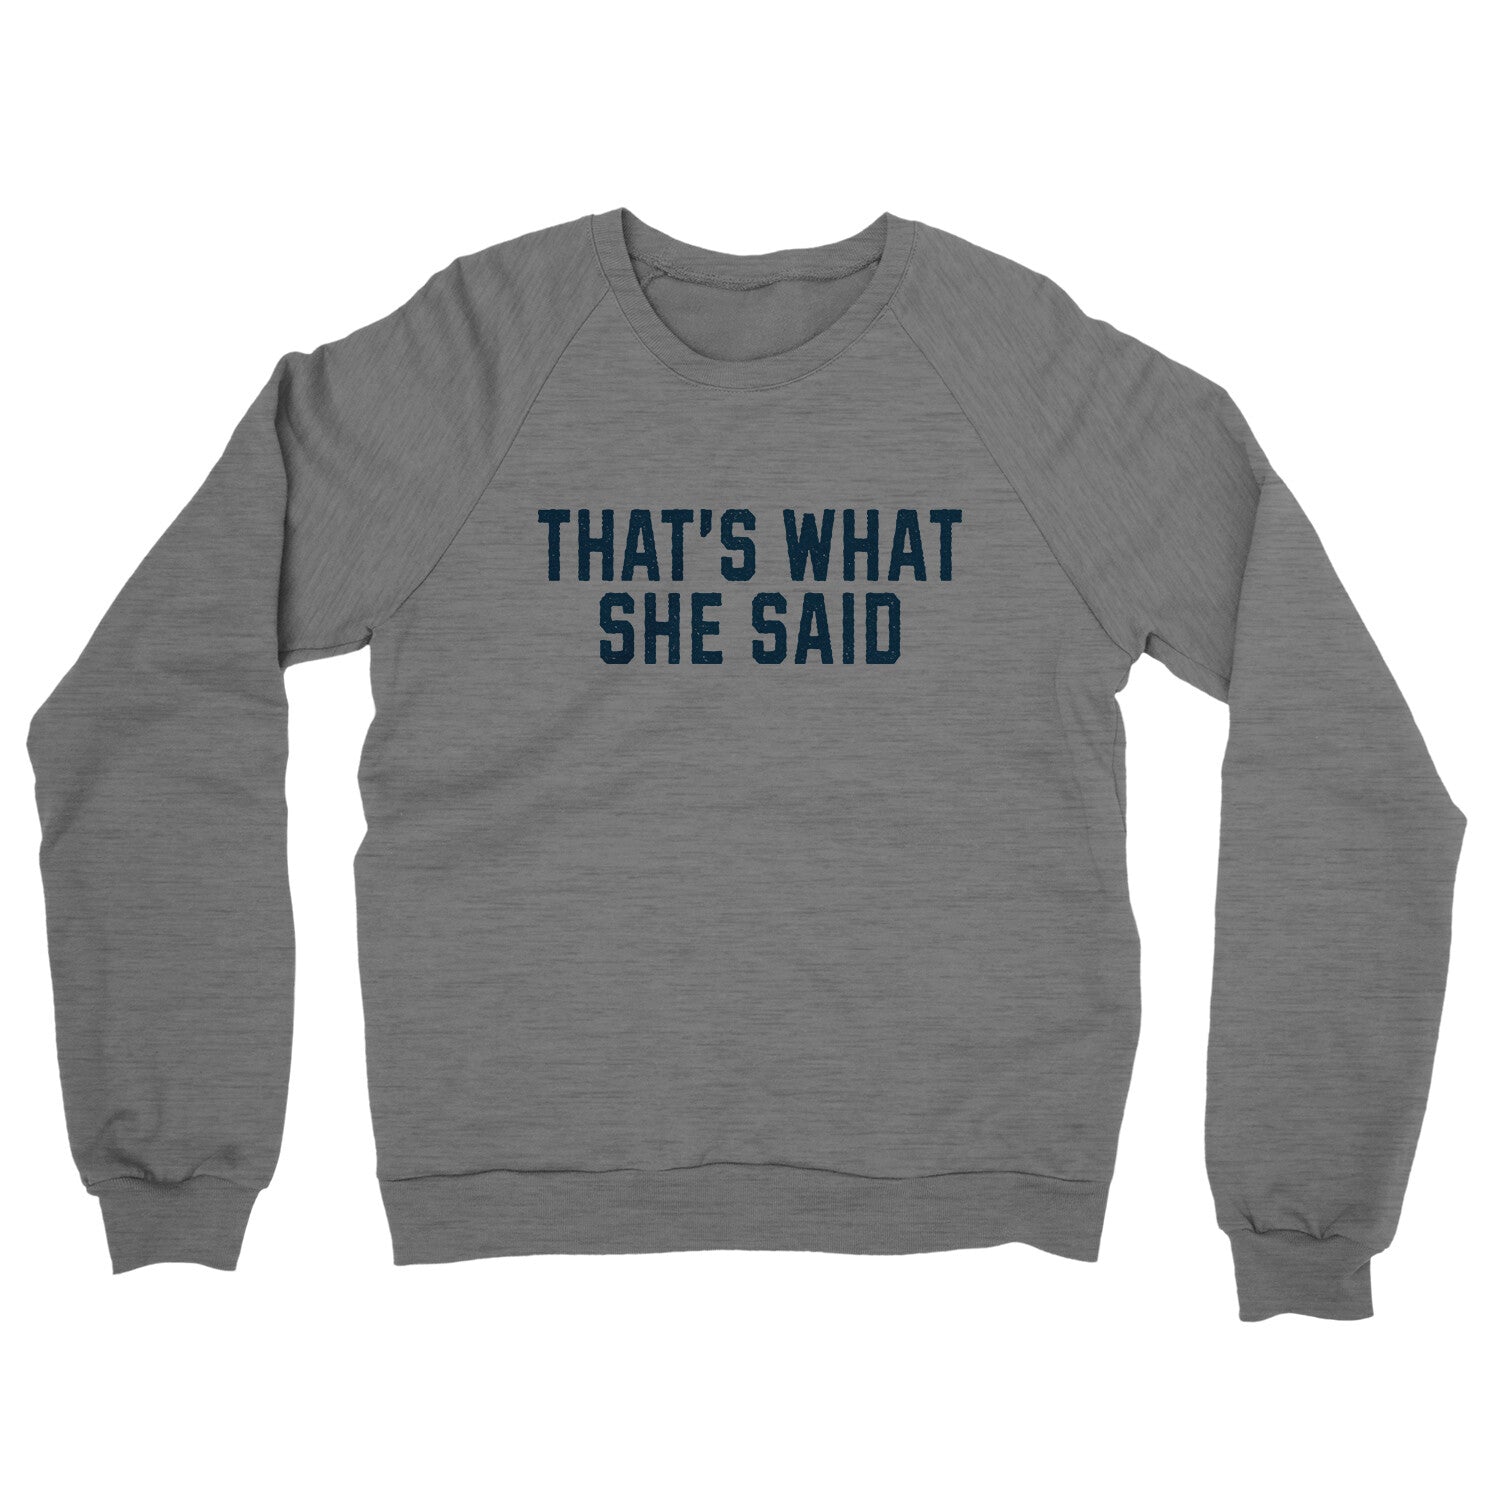 That's What She Said in Graphite Heather Color